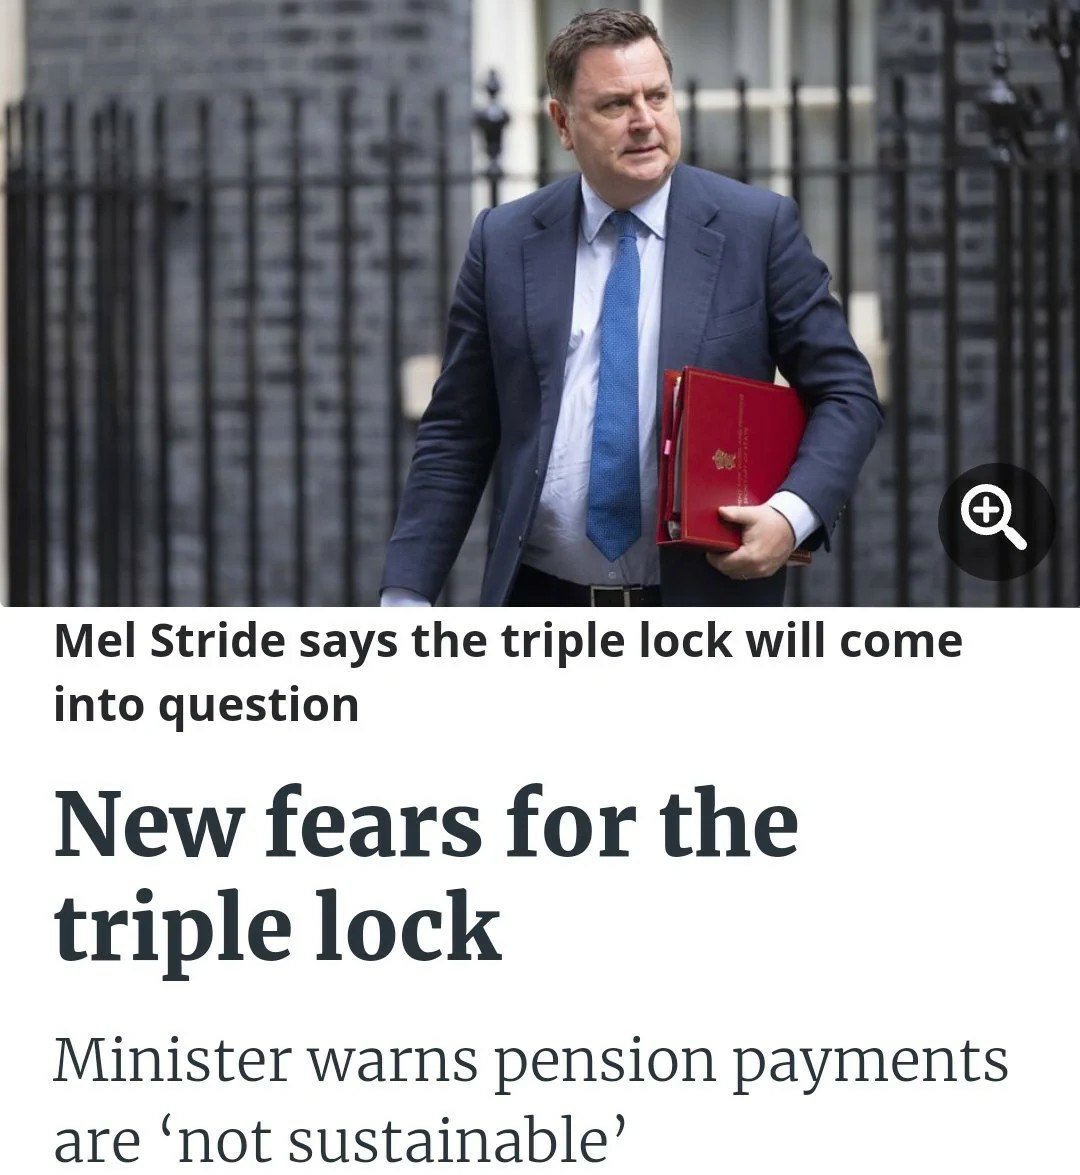 #TripleLock
Our elders paid their dues. IF you can find £1.6 billion for global #NetZero and provide all expenses paid shelter to illegal migrants OR fund inflation busting pay rises to the public sector, you can dam well respect and pay the cost of #TripleLock